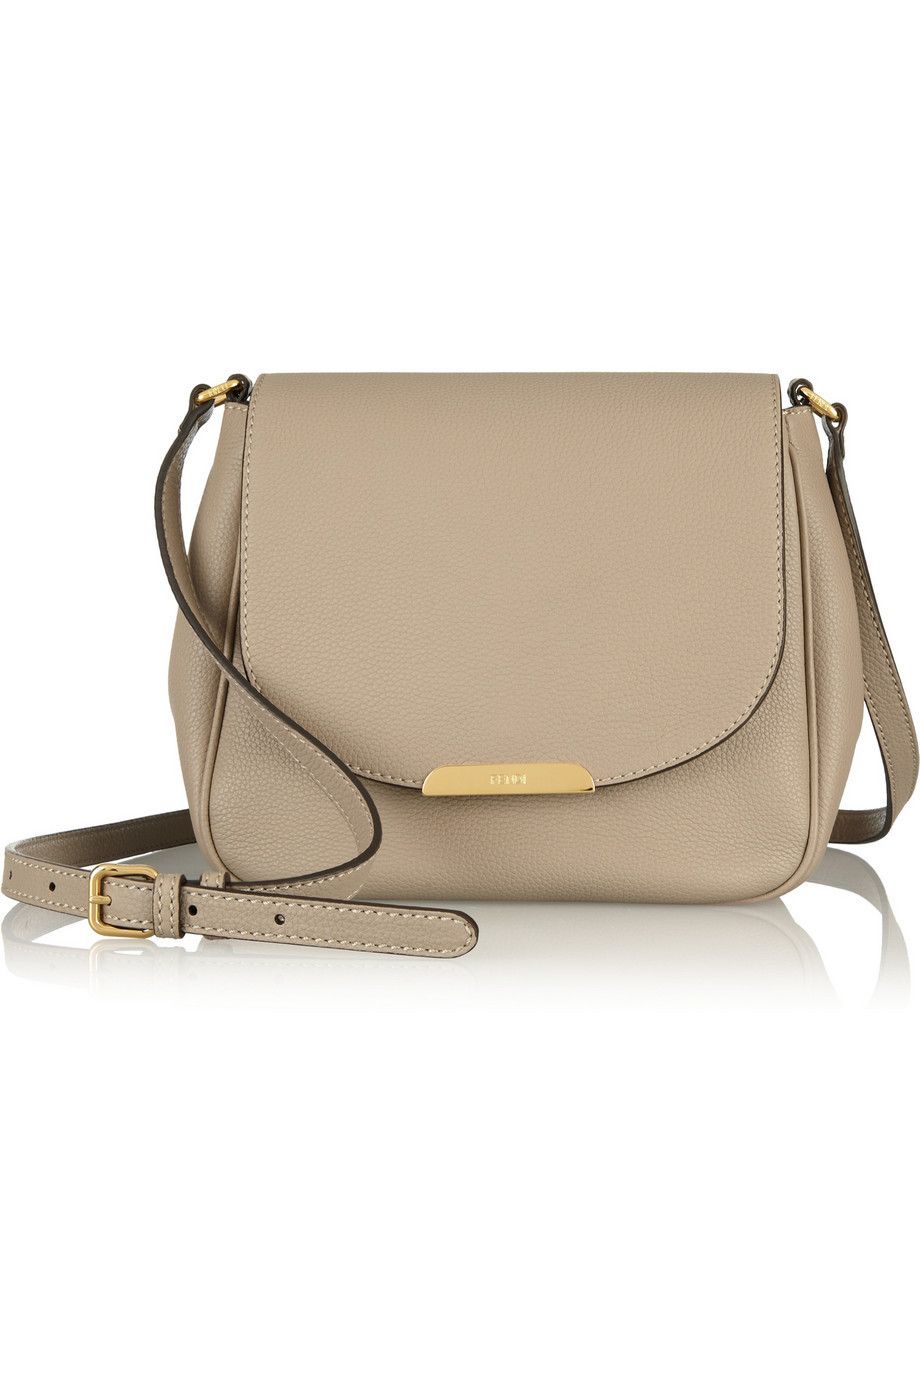 Brown, Bag, Khaki, Tan, Shoulder bag, Leather, Luggage and bags, Beige, Material property, Rectangle, 